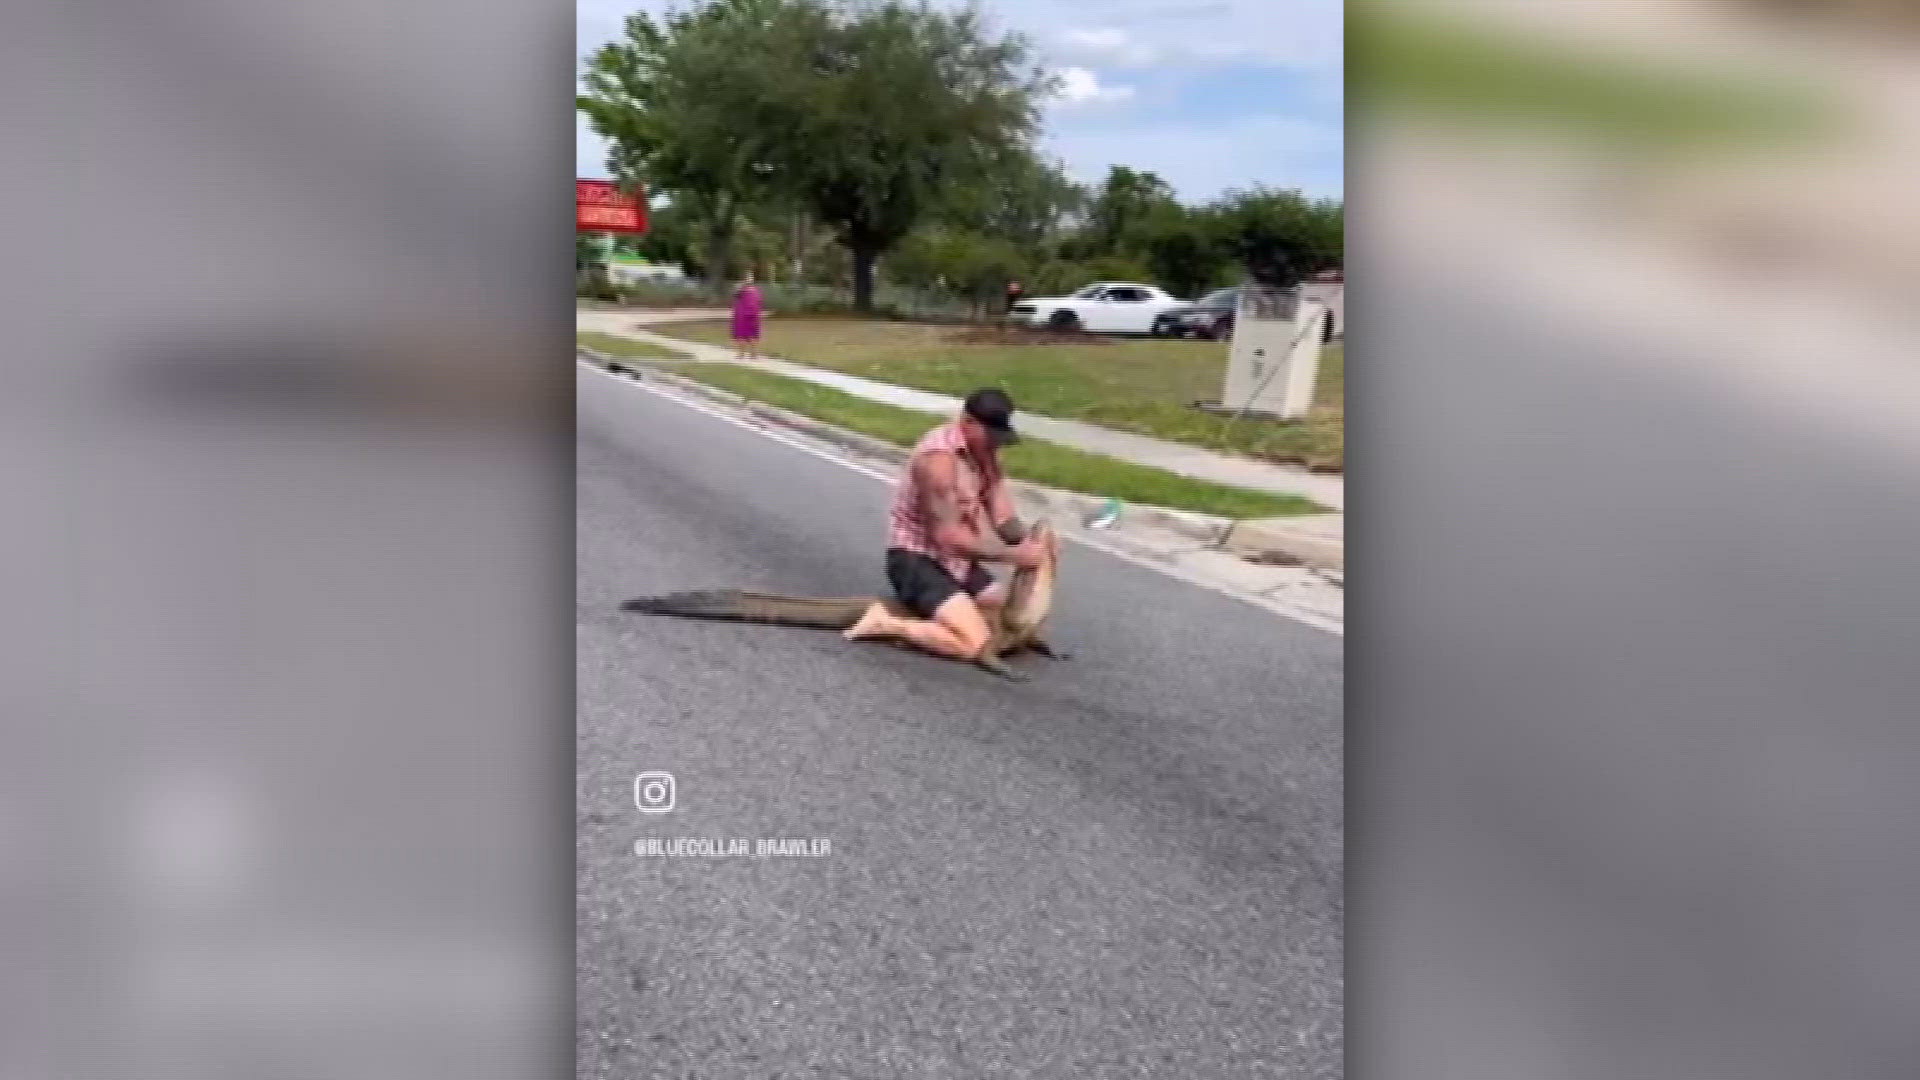 The video has received millions of views, including being shared by Jacksonville icon Lil Duval. Mike Dragich, the man who caught the gator, says it was no problem.